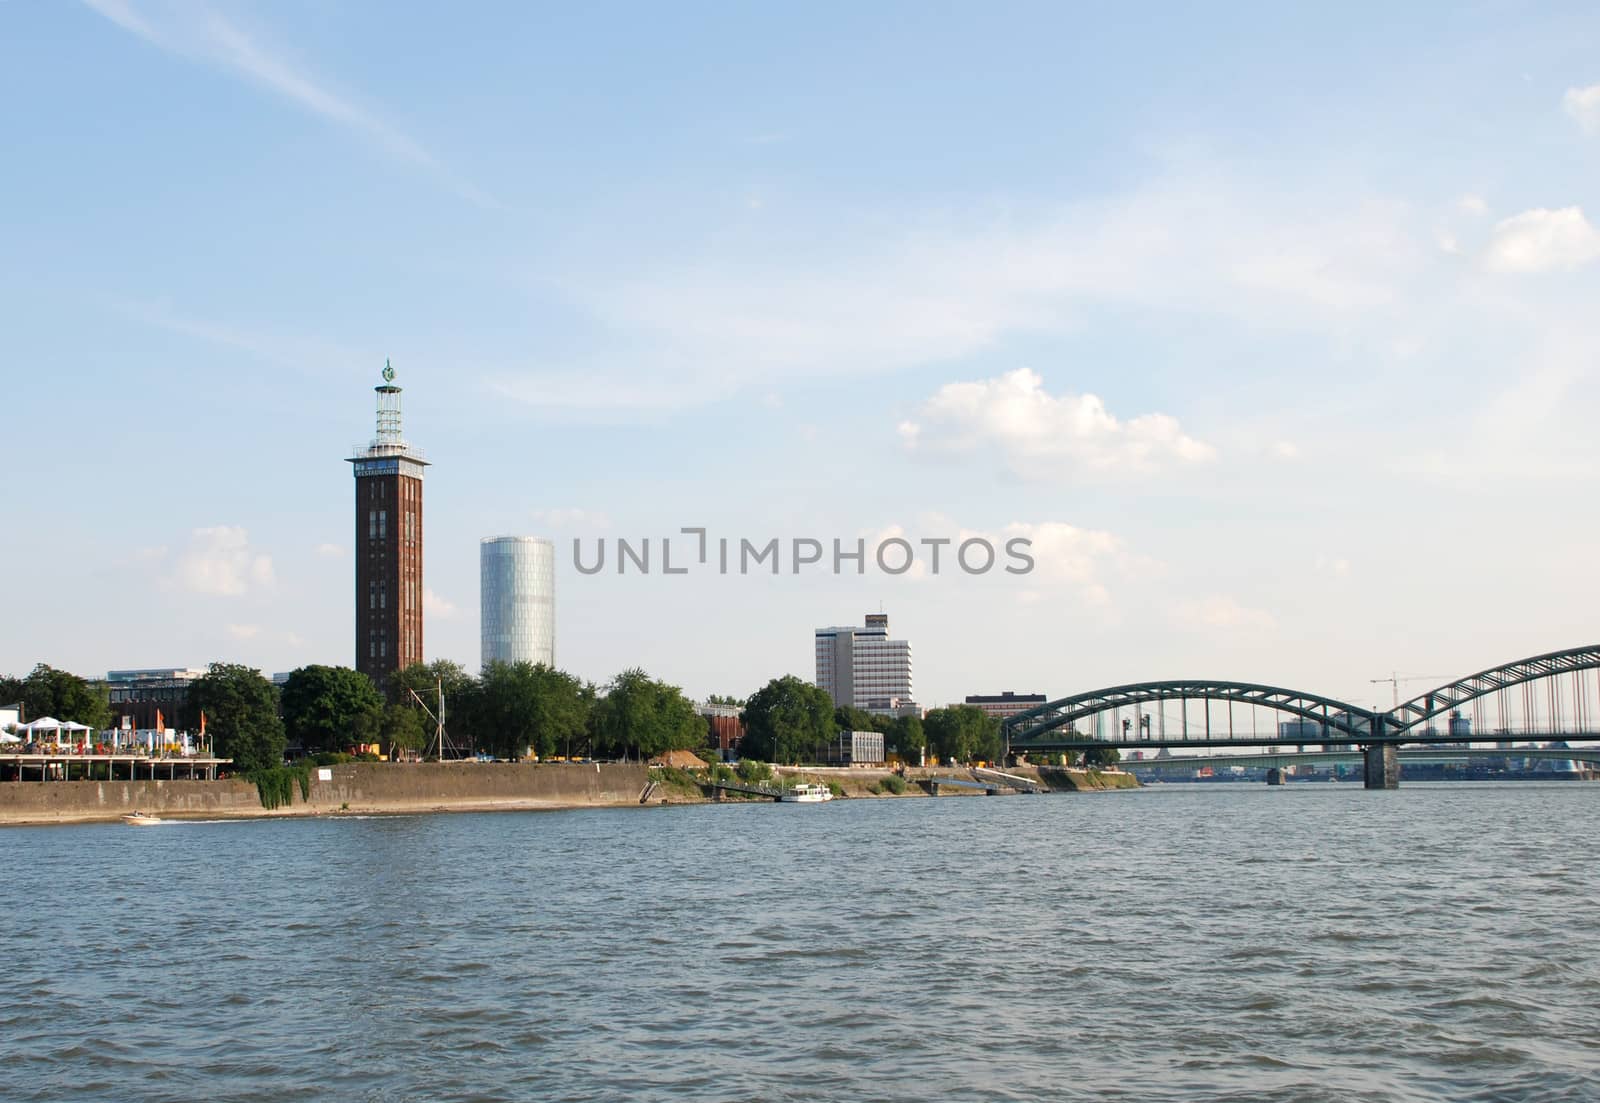 The Messeturm (Fair Tower), Triangle Tower and Hohenzollernbruecke (Hohenzollern Bridge) seen from the Rhine in Cologne, Germany